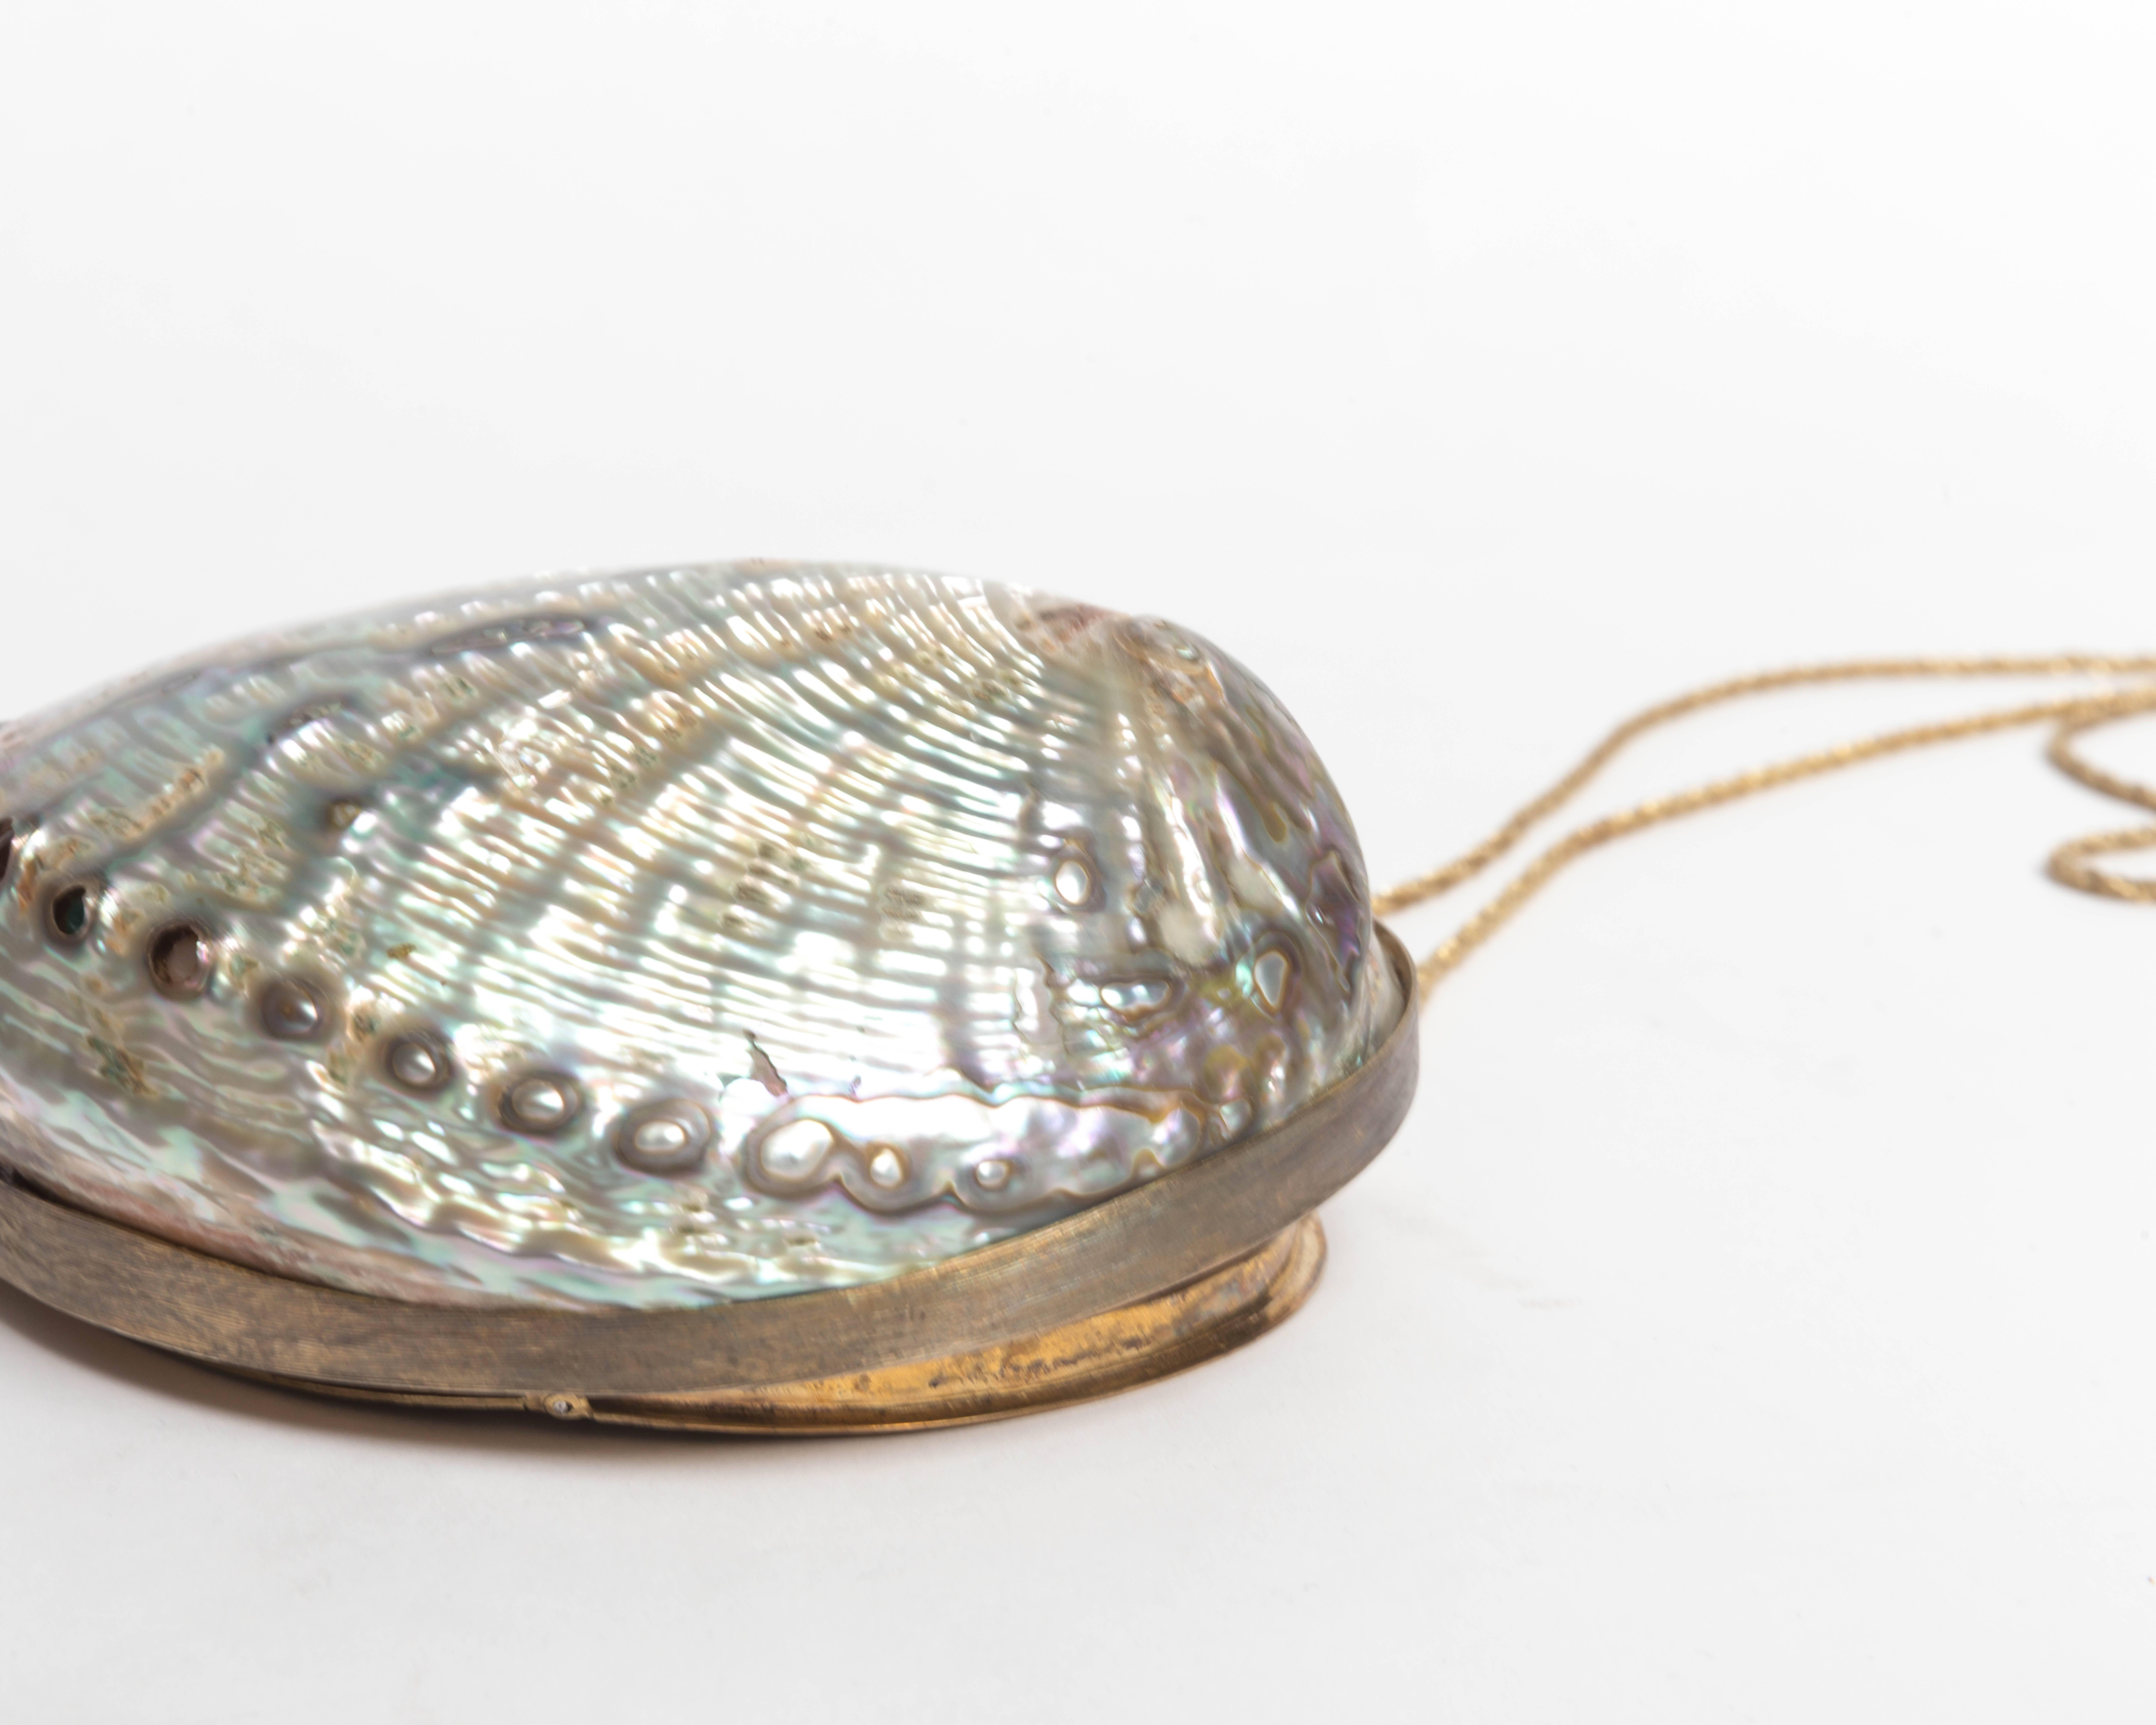 This stunning Judith Leiber Minaudiere measures 6 inches x 5 inches at its widest points. Lined in gold leather, with a convertible gold chain, this polished abalone shell is embedded with semi precious cabochon stones in a rainbow of